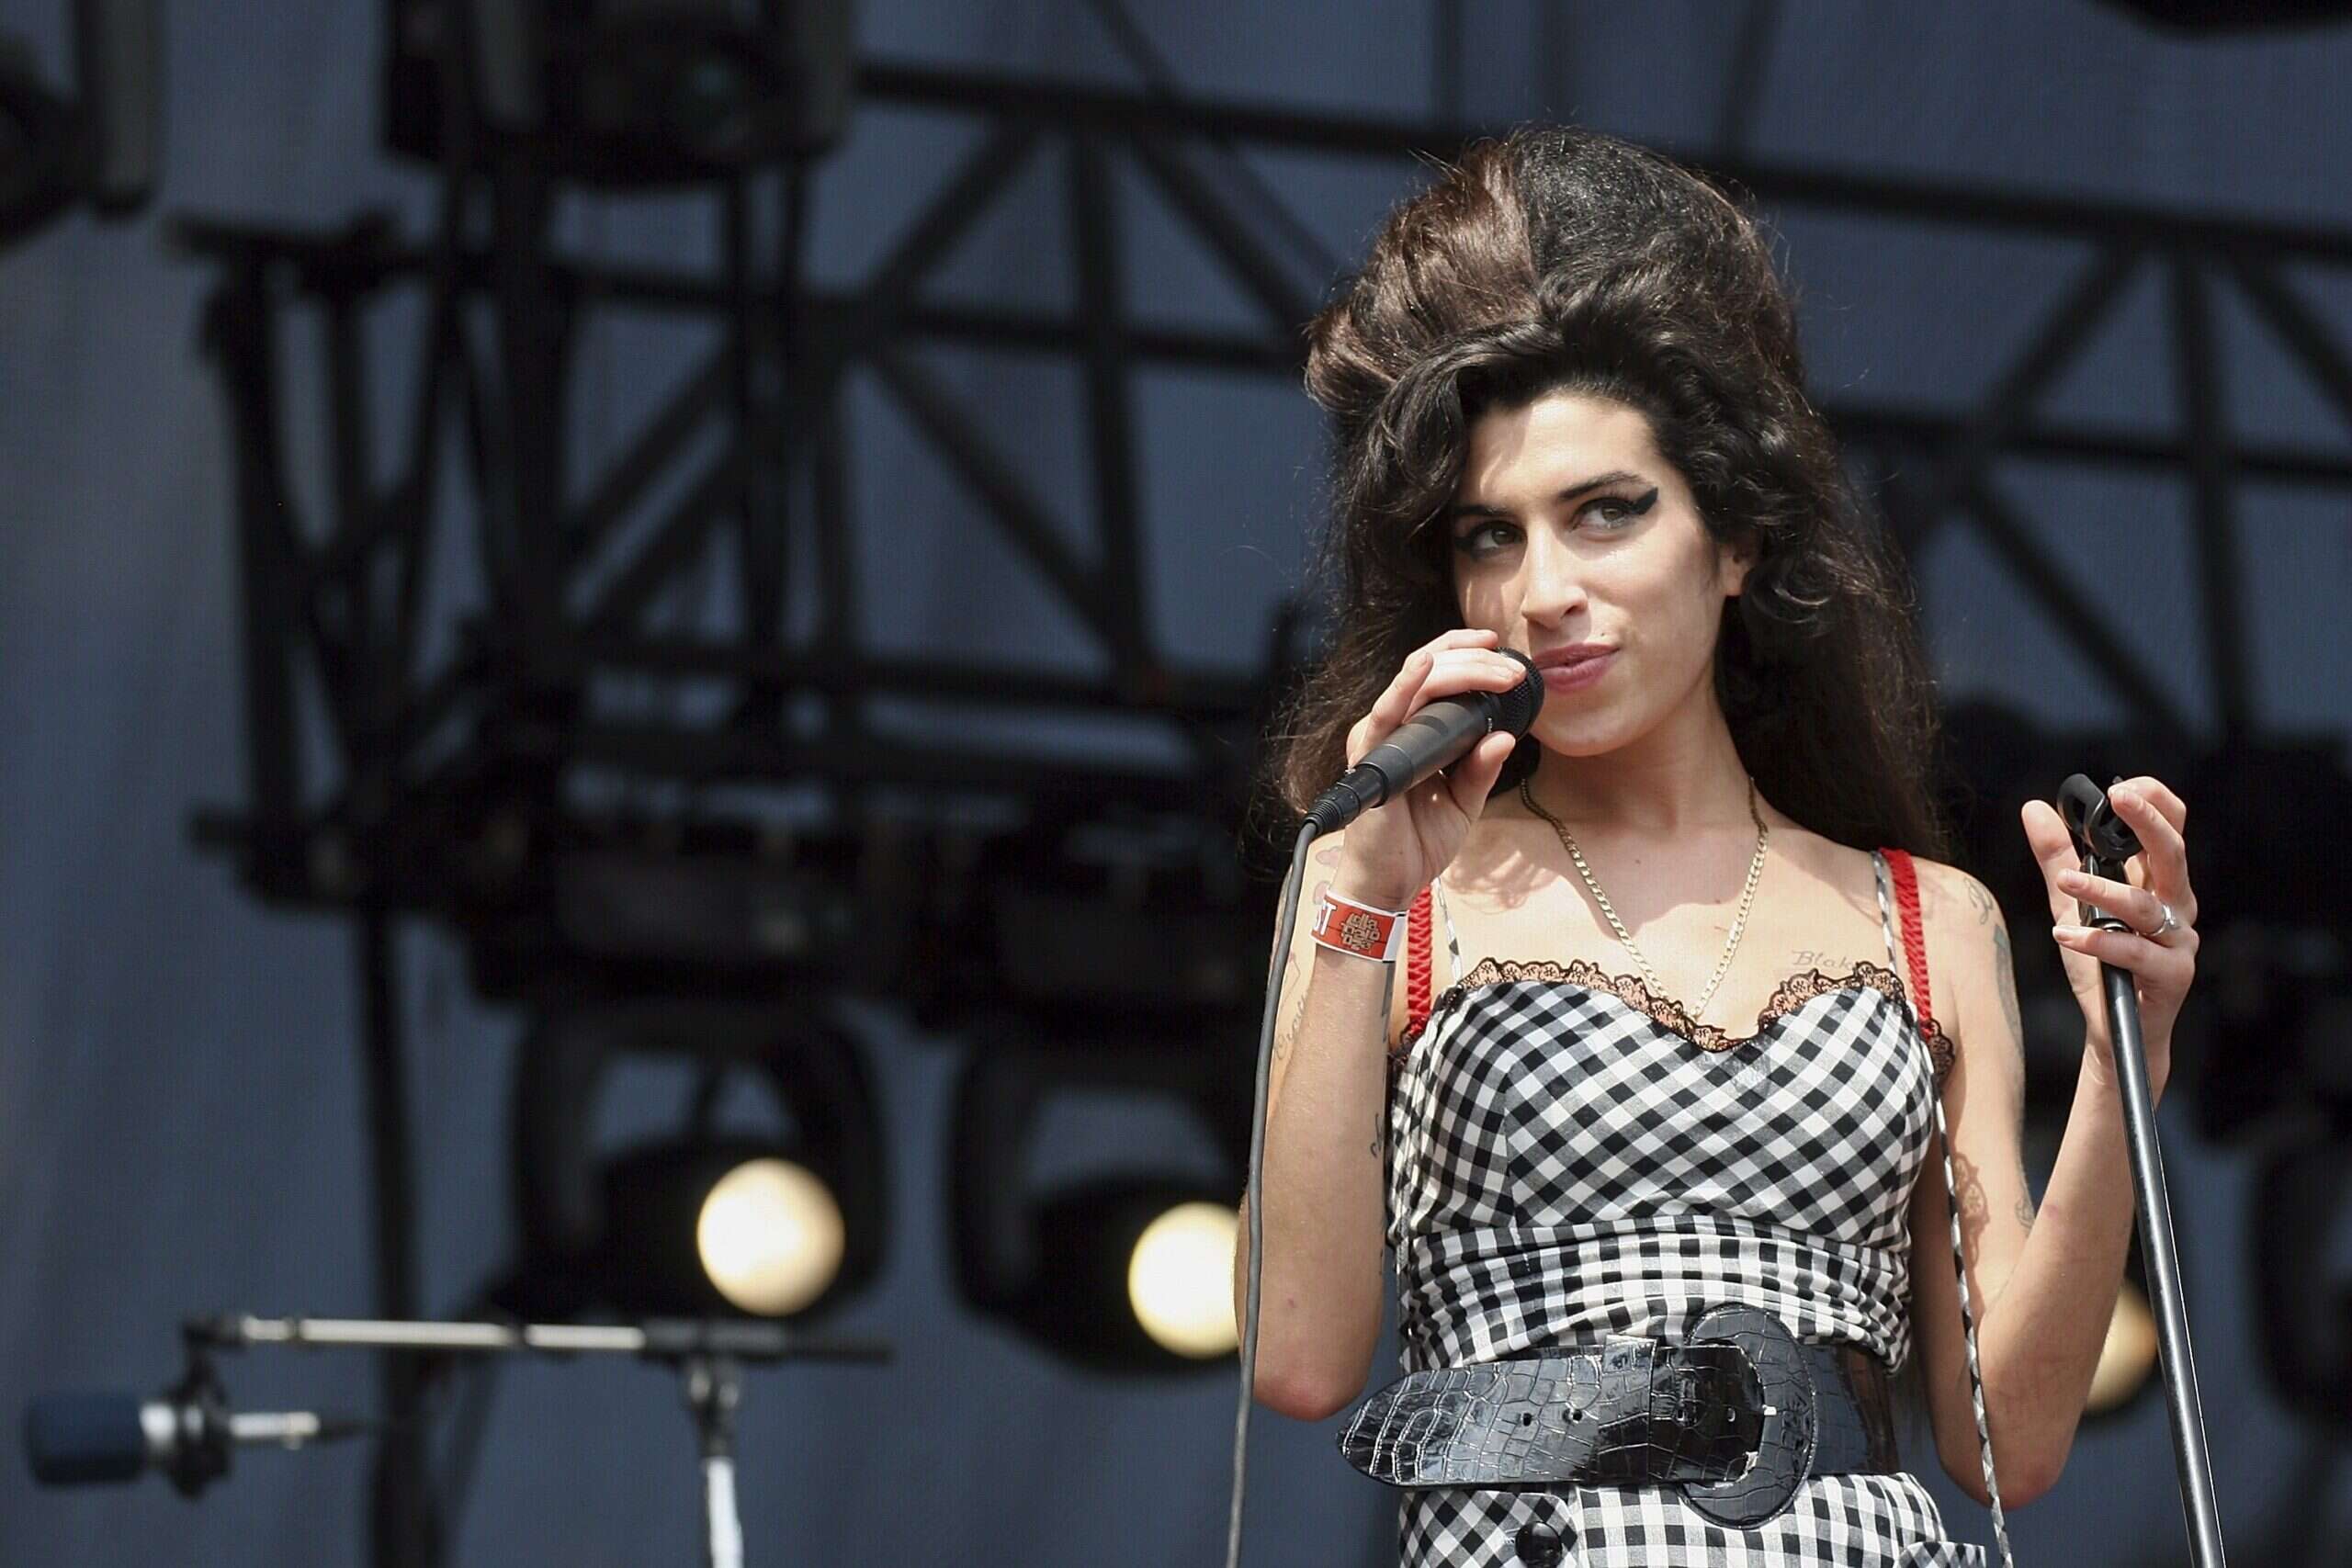 In “Reclaiming Amy”, Winehouse’s friends and family aim to change the public's perception of the singer